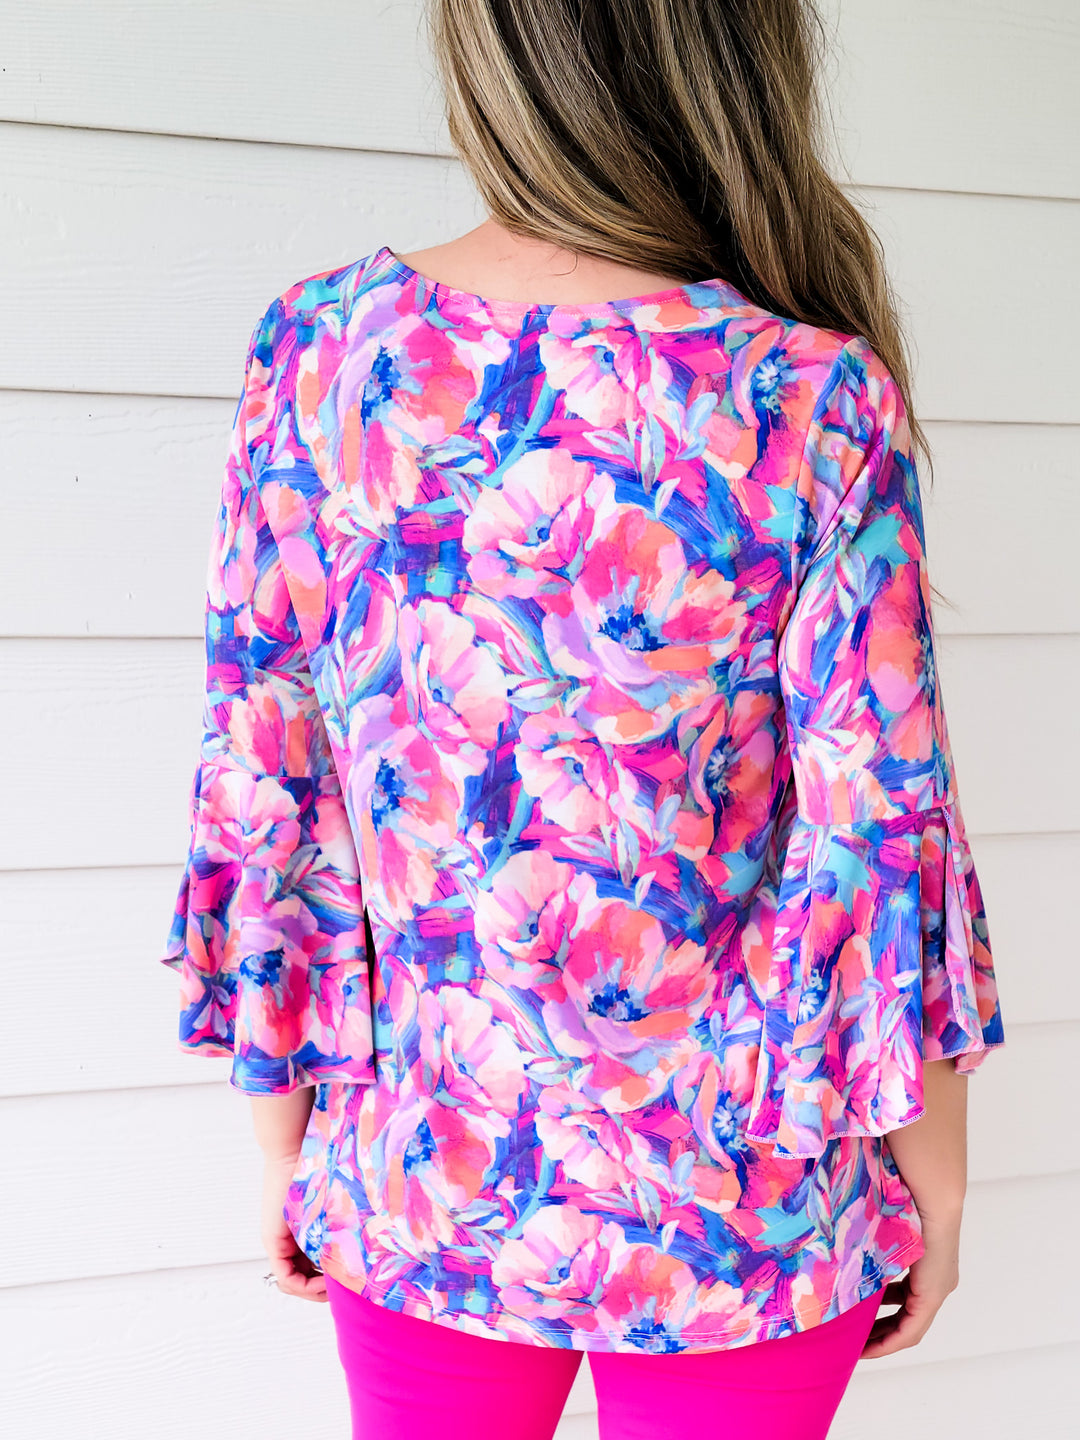 DEAR SCARLETT STRETCHY TIE FRONT TOP 3/4 SLEEVES - ROYAL PINK FLOWER